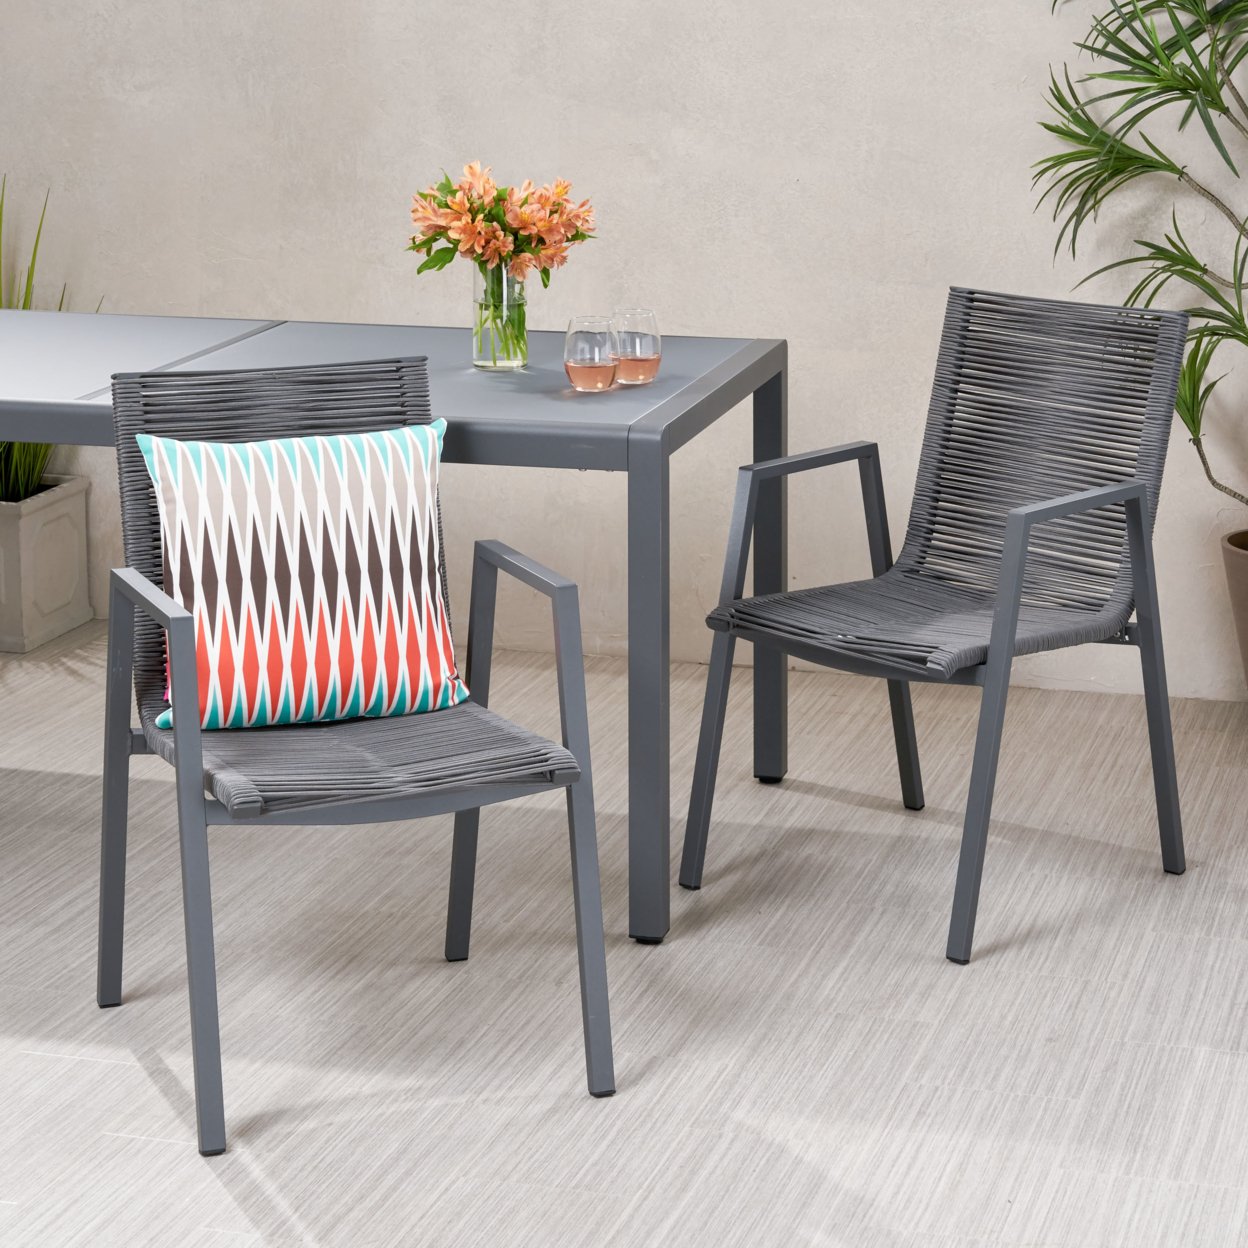 Elma Outdoor Modern Aluminum Dining Chair With Rope Seat (Set Of 2) - Gray + Dark Gray